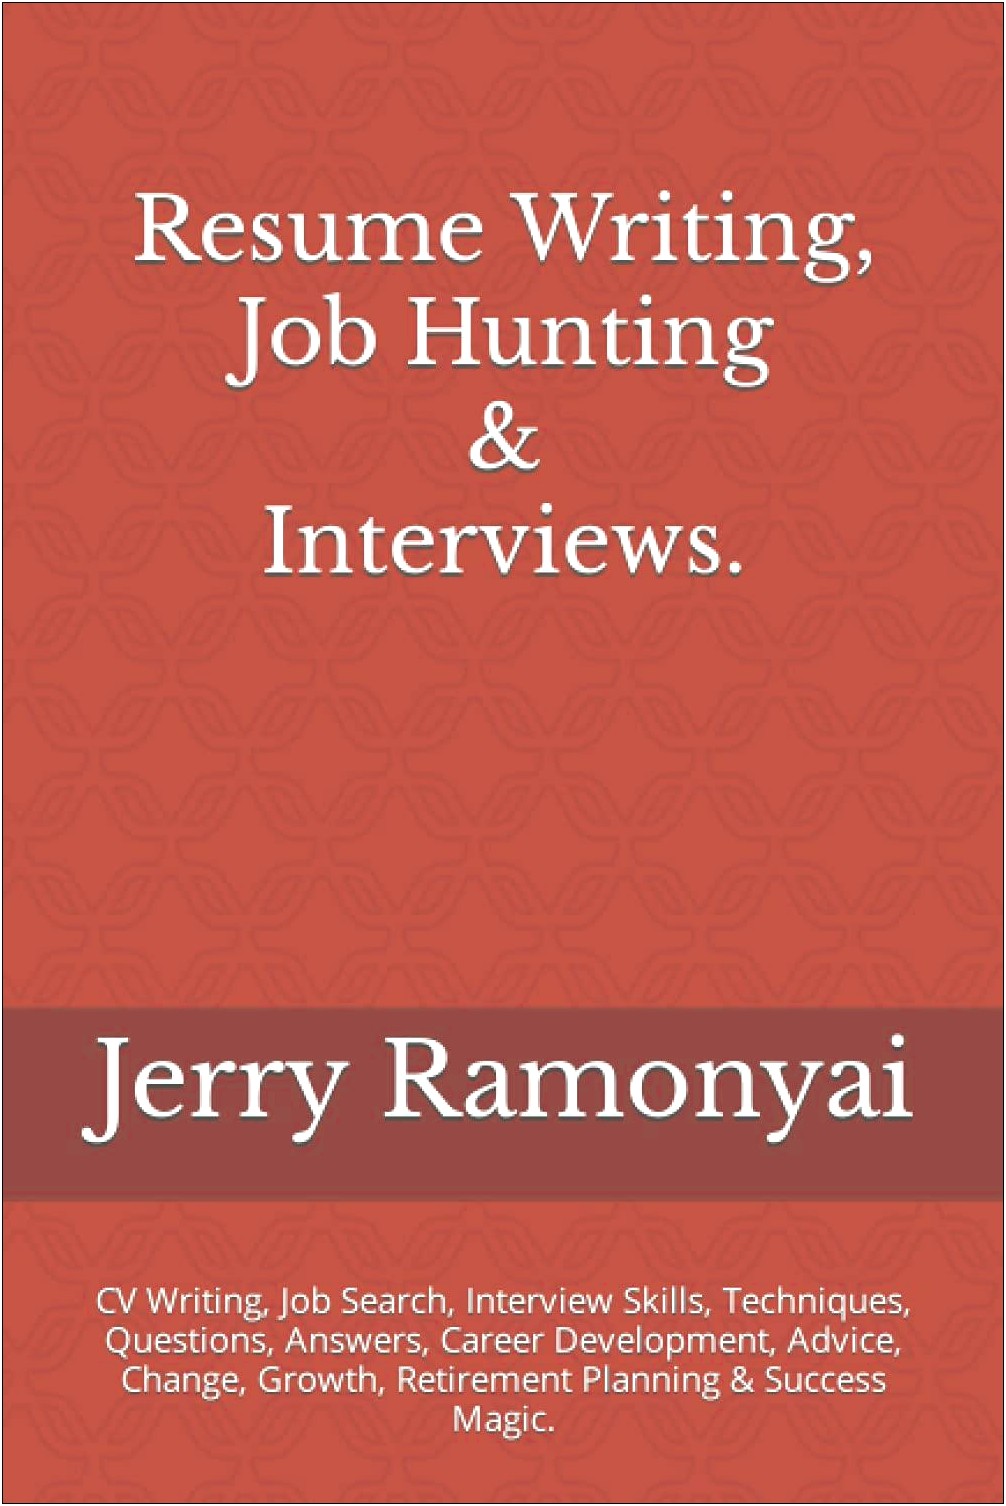 The Resume Job Search & Interview Guide